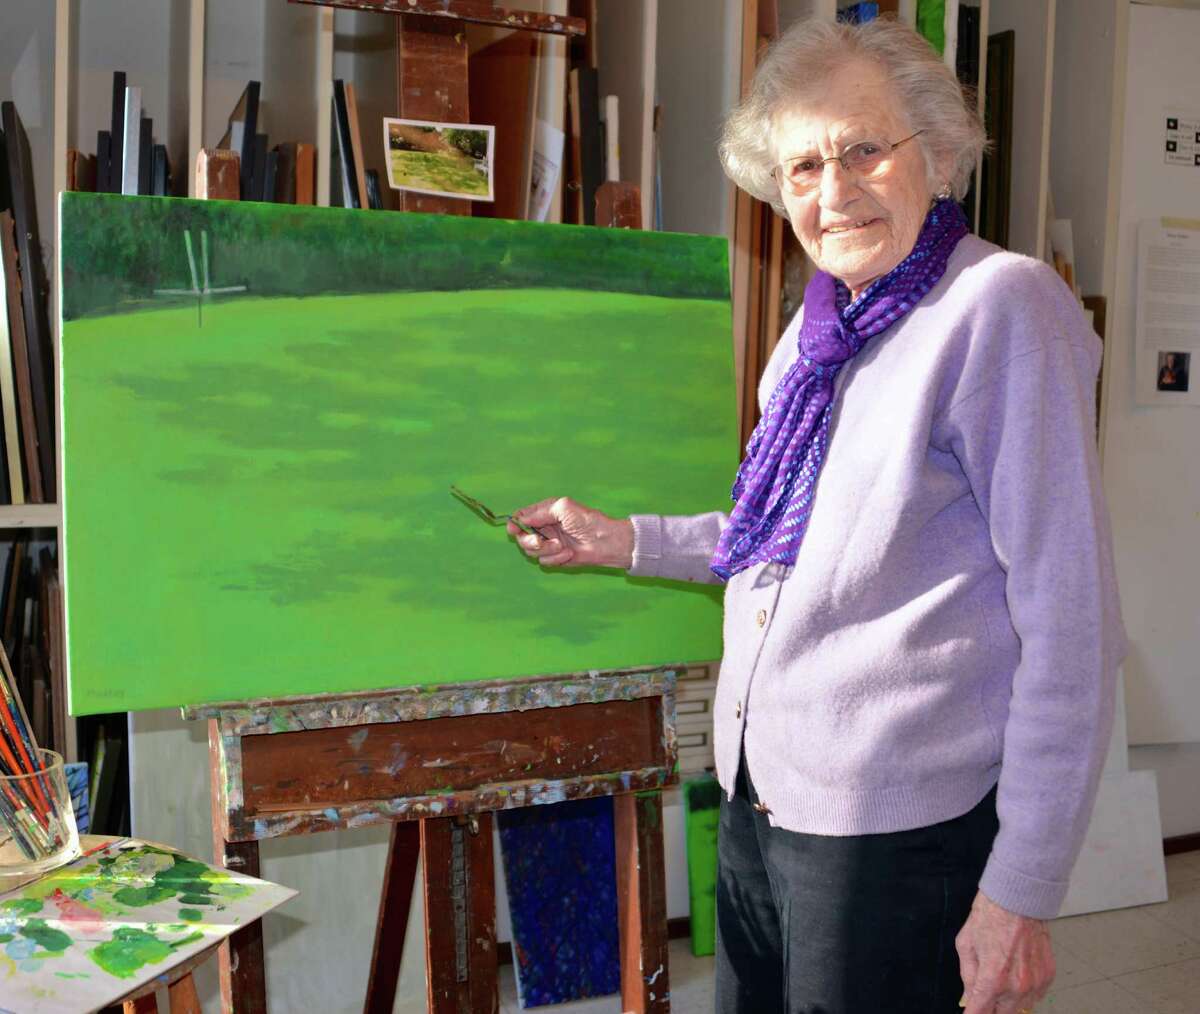 ìSusan Malloy: In The Studio,î an exhibition dedicated to the Westport artist's prolific, lifelong career will be on dispaly at the Westport Arts Center from March 1 through March 23.